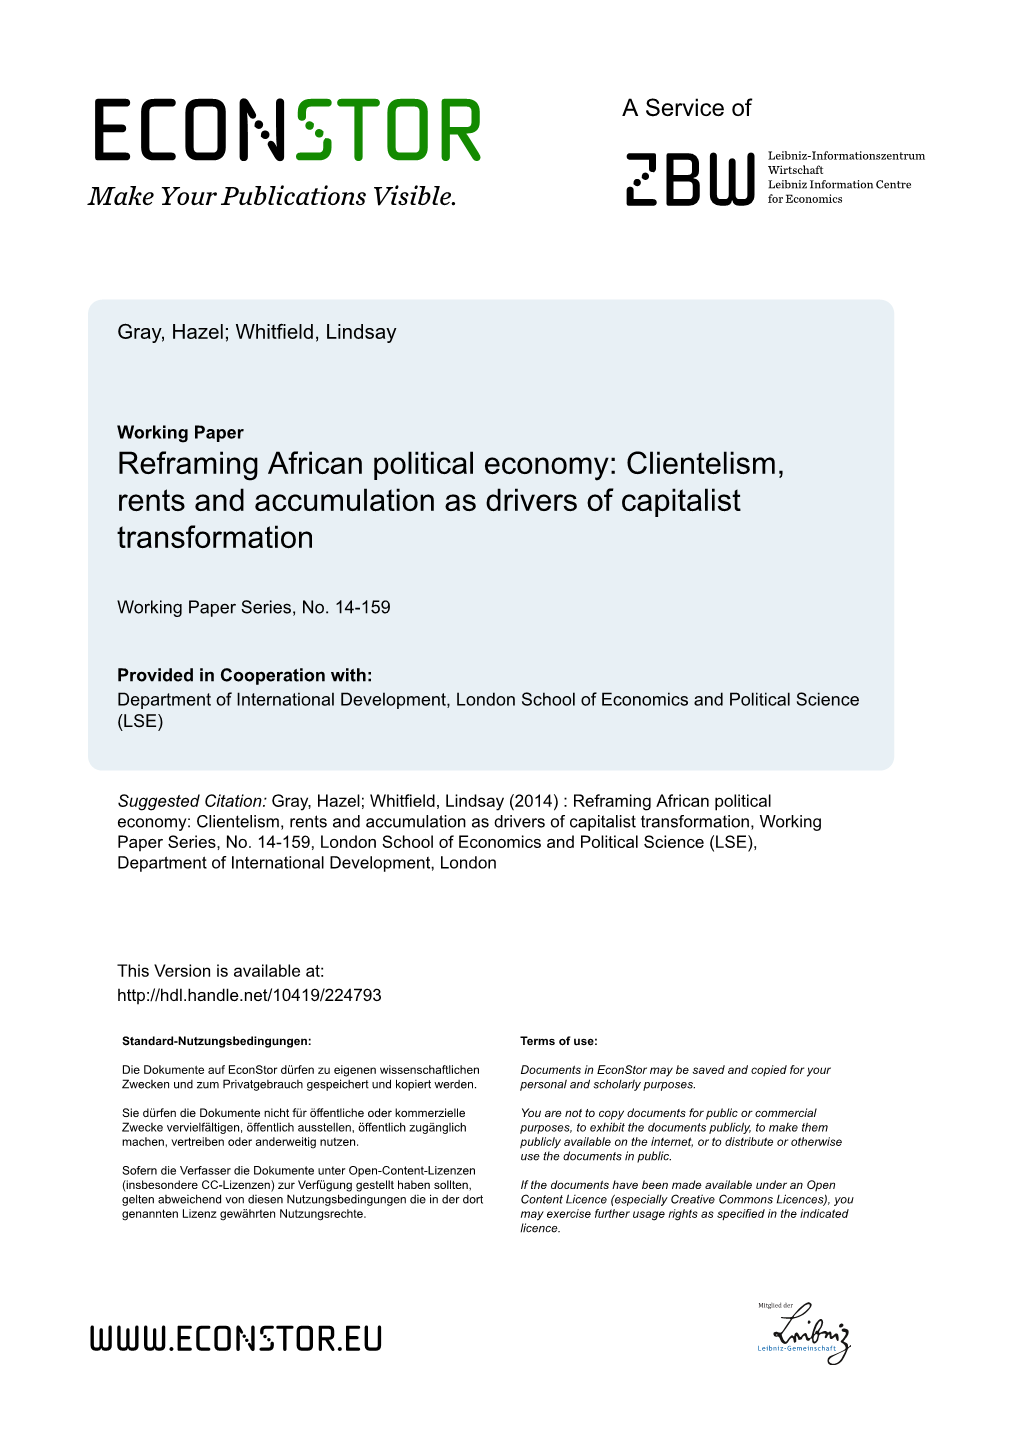 Reframing African Political Economy: Clientelism, Rents and Accumulation As Drivers of Capitalist Transformation